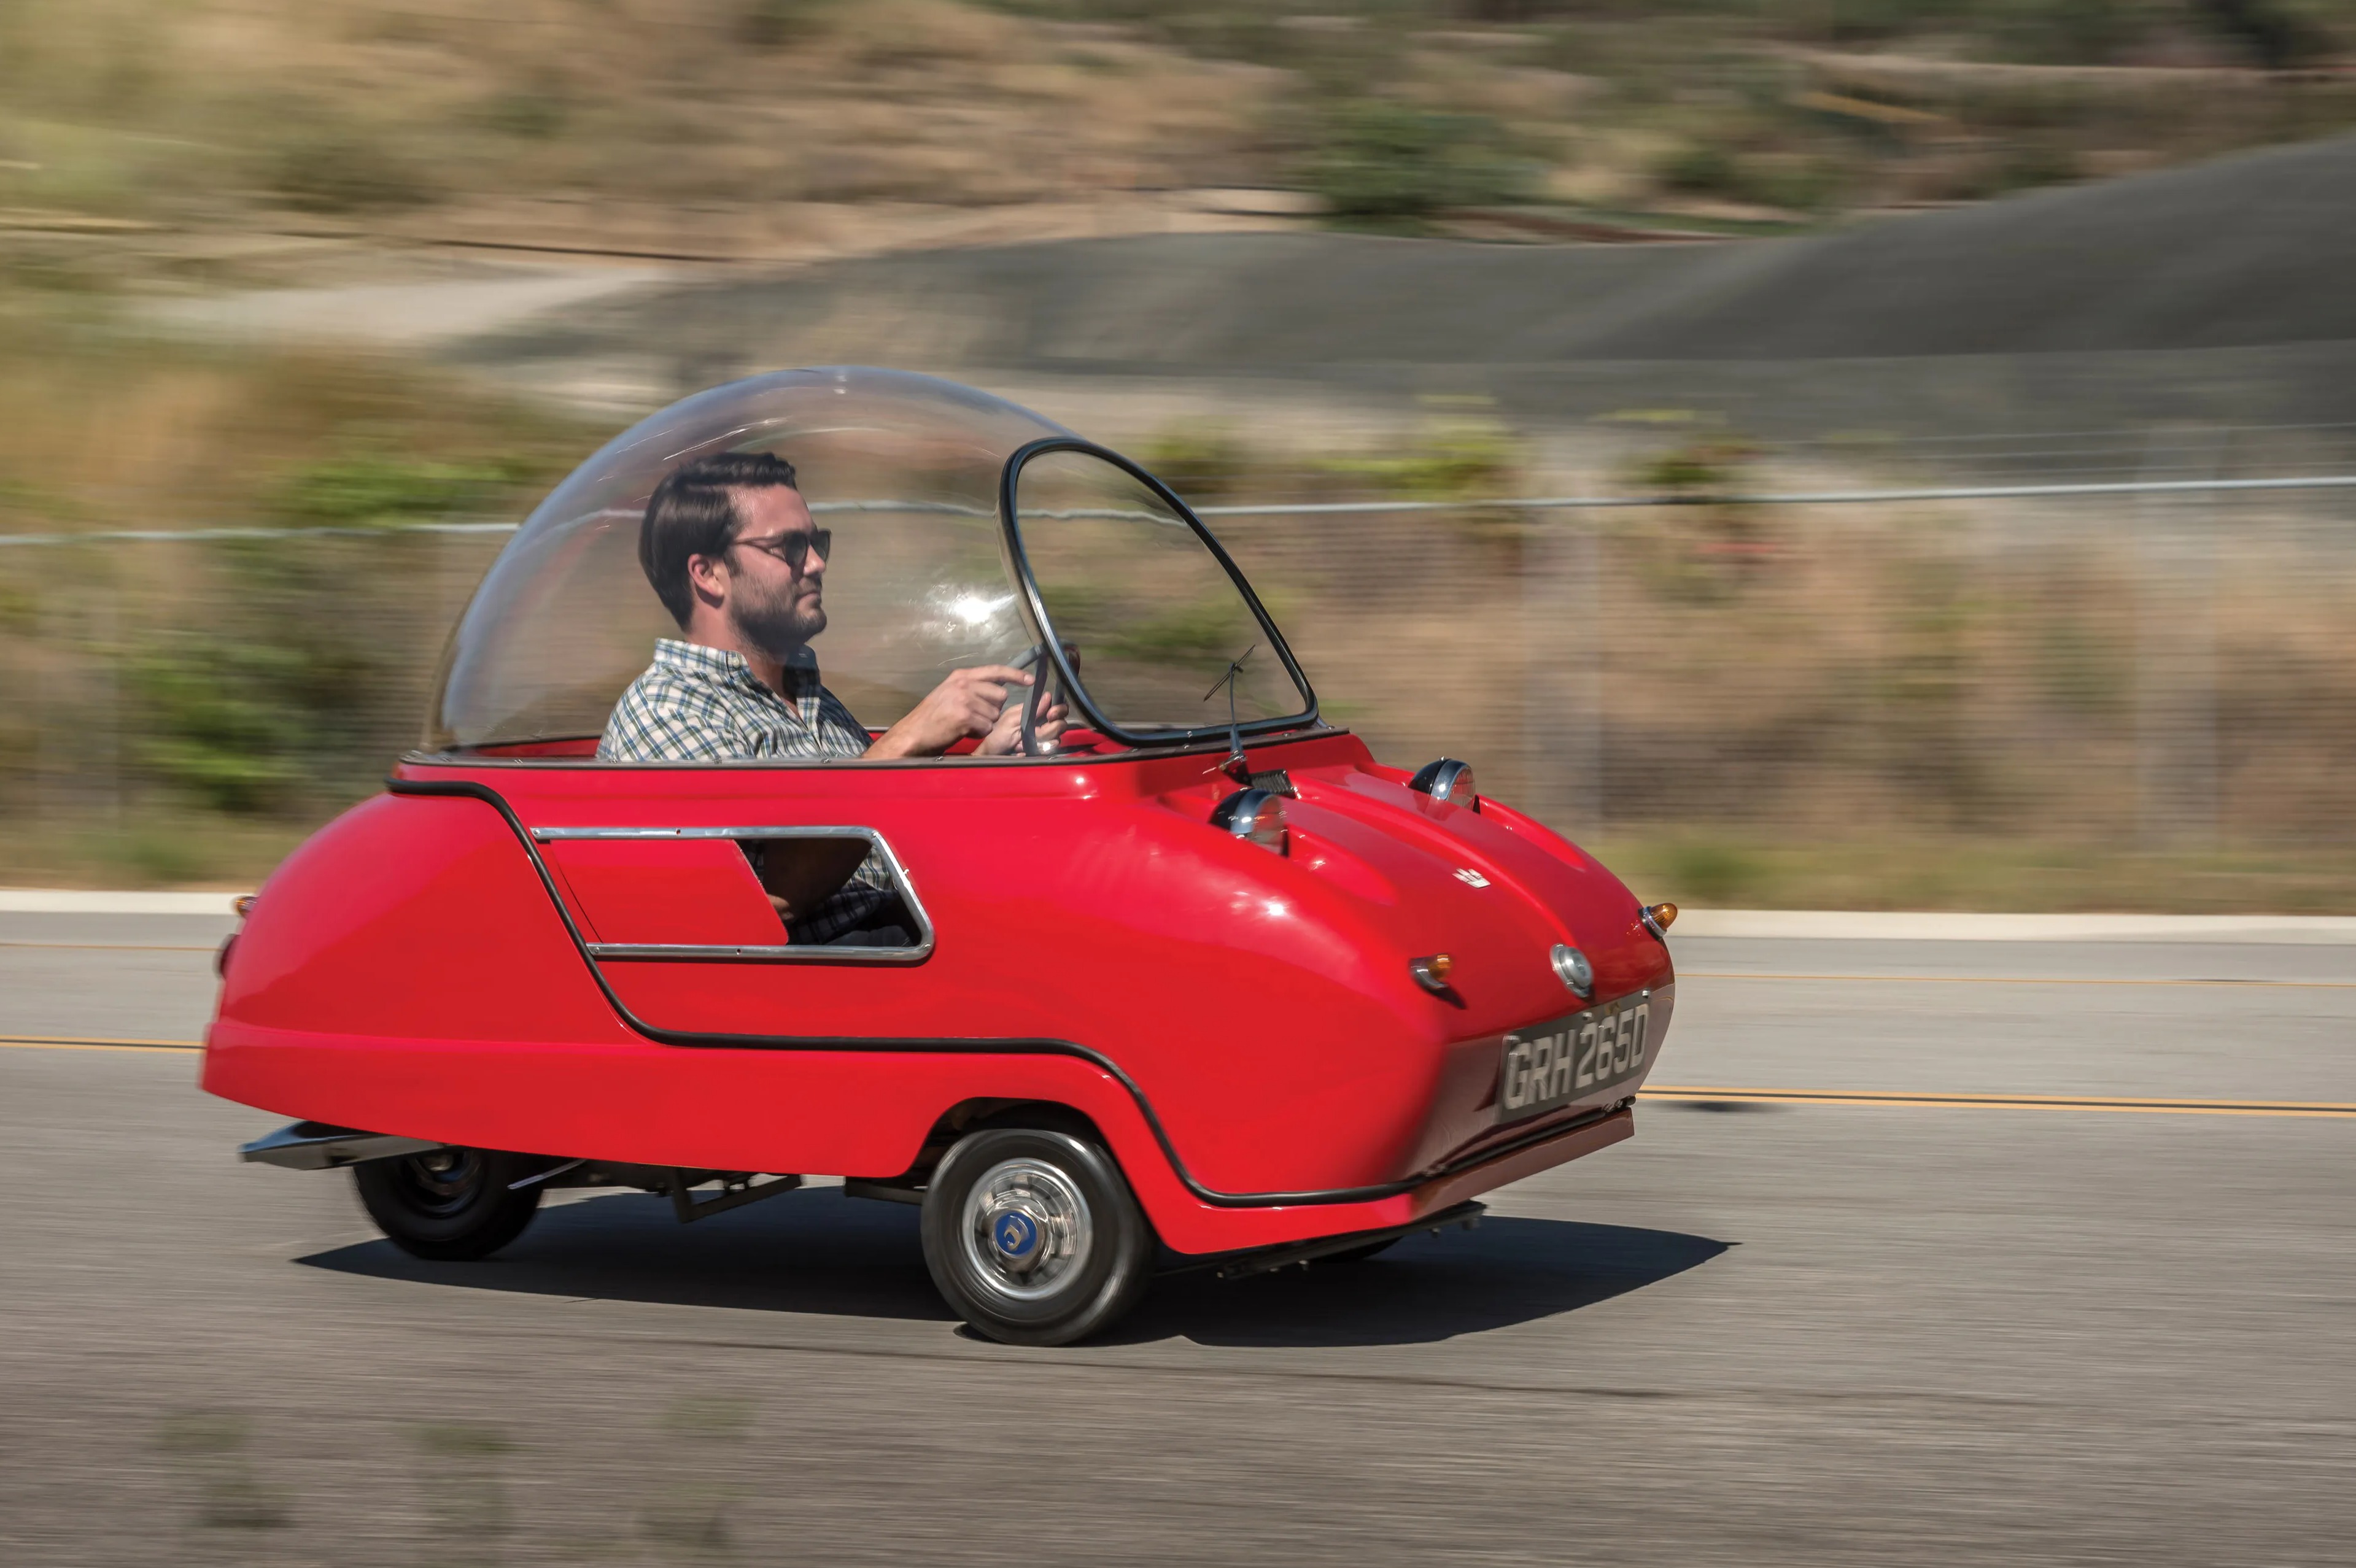 The wacky three-wheeler can reach the top speed of 28mph